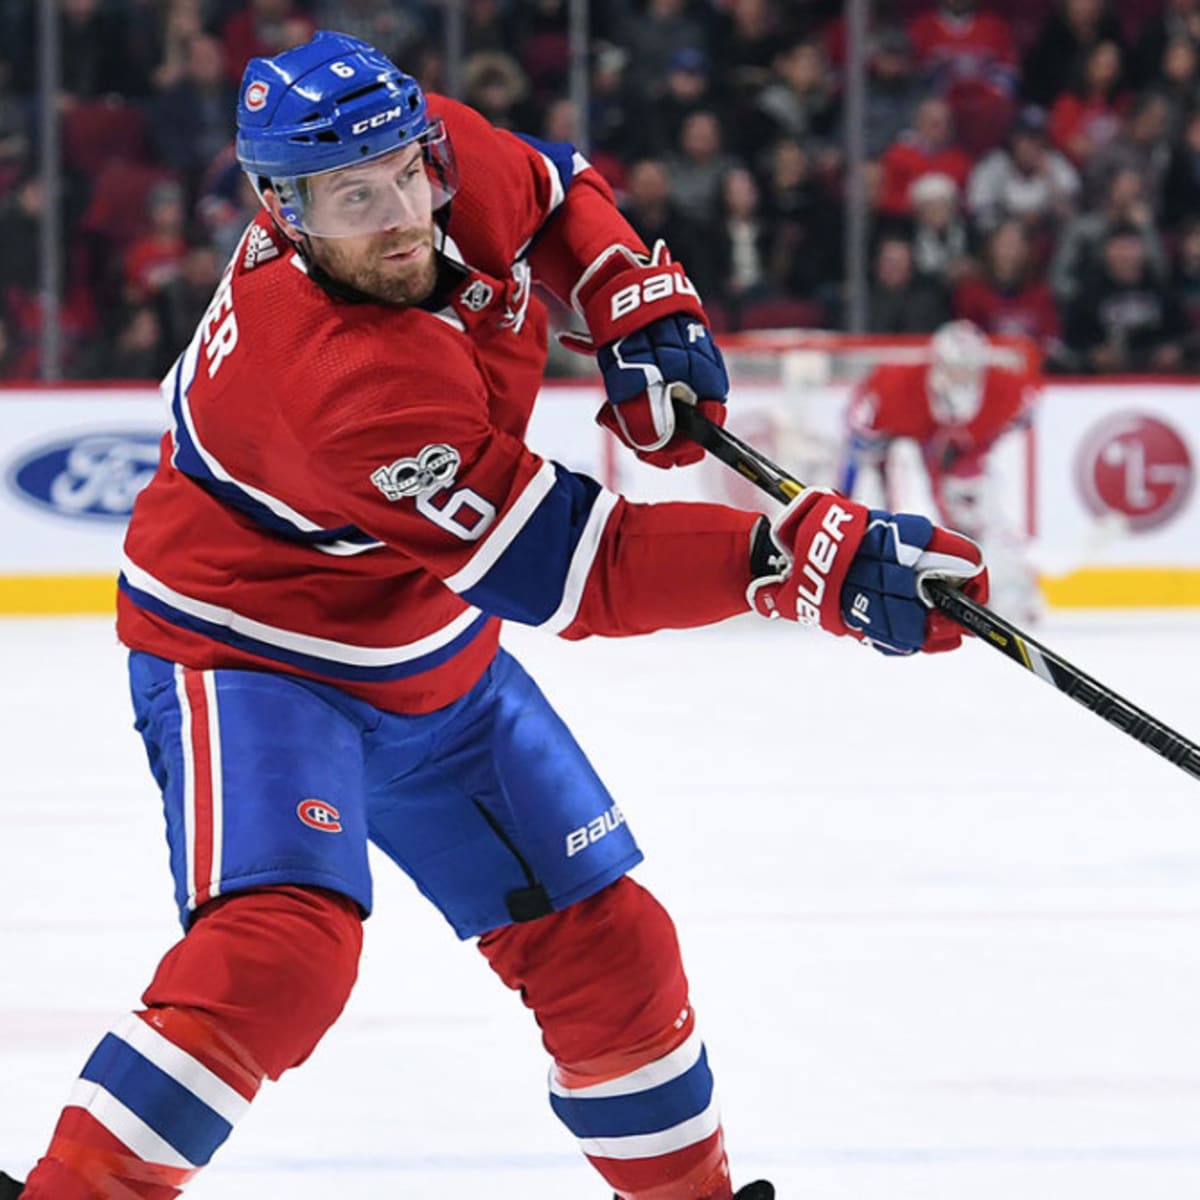 Notes: Injured Shea Weber day-to-day